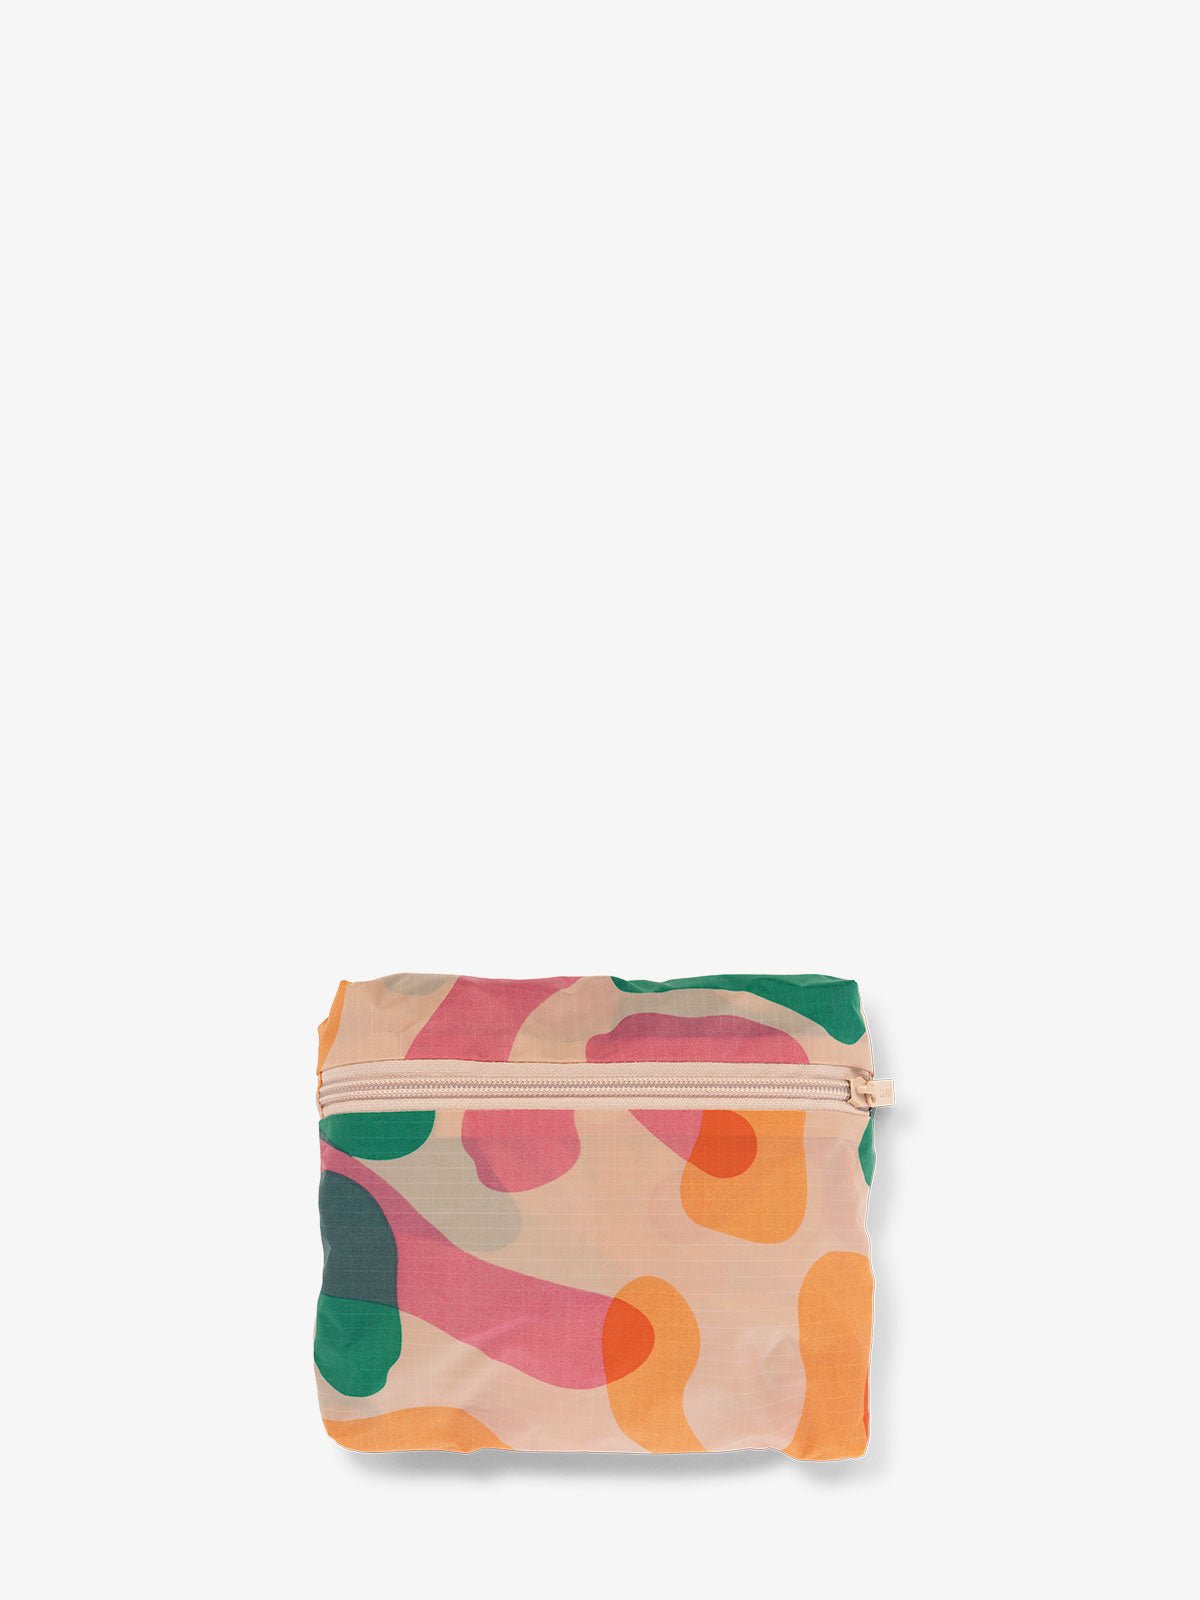 CALPAK Compakt foldable tote bag in modern abstract